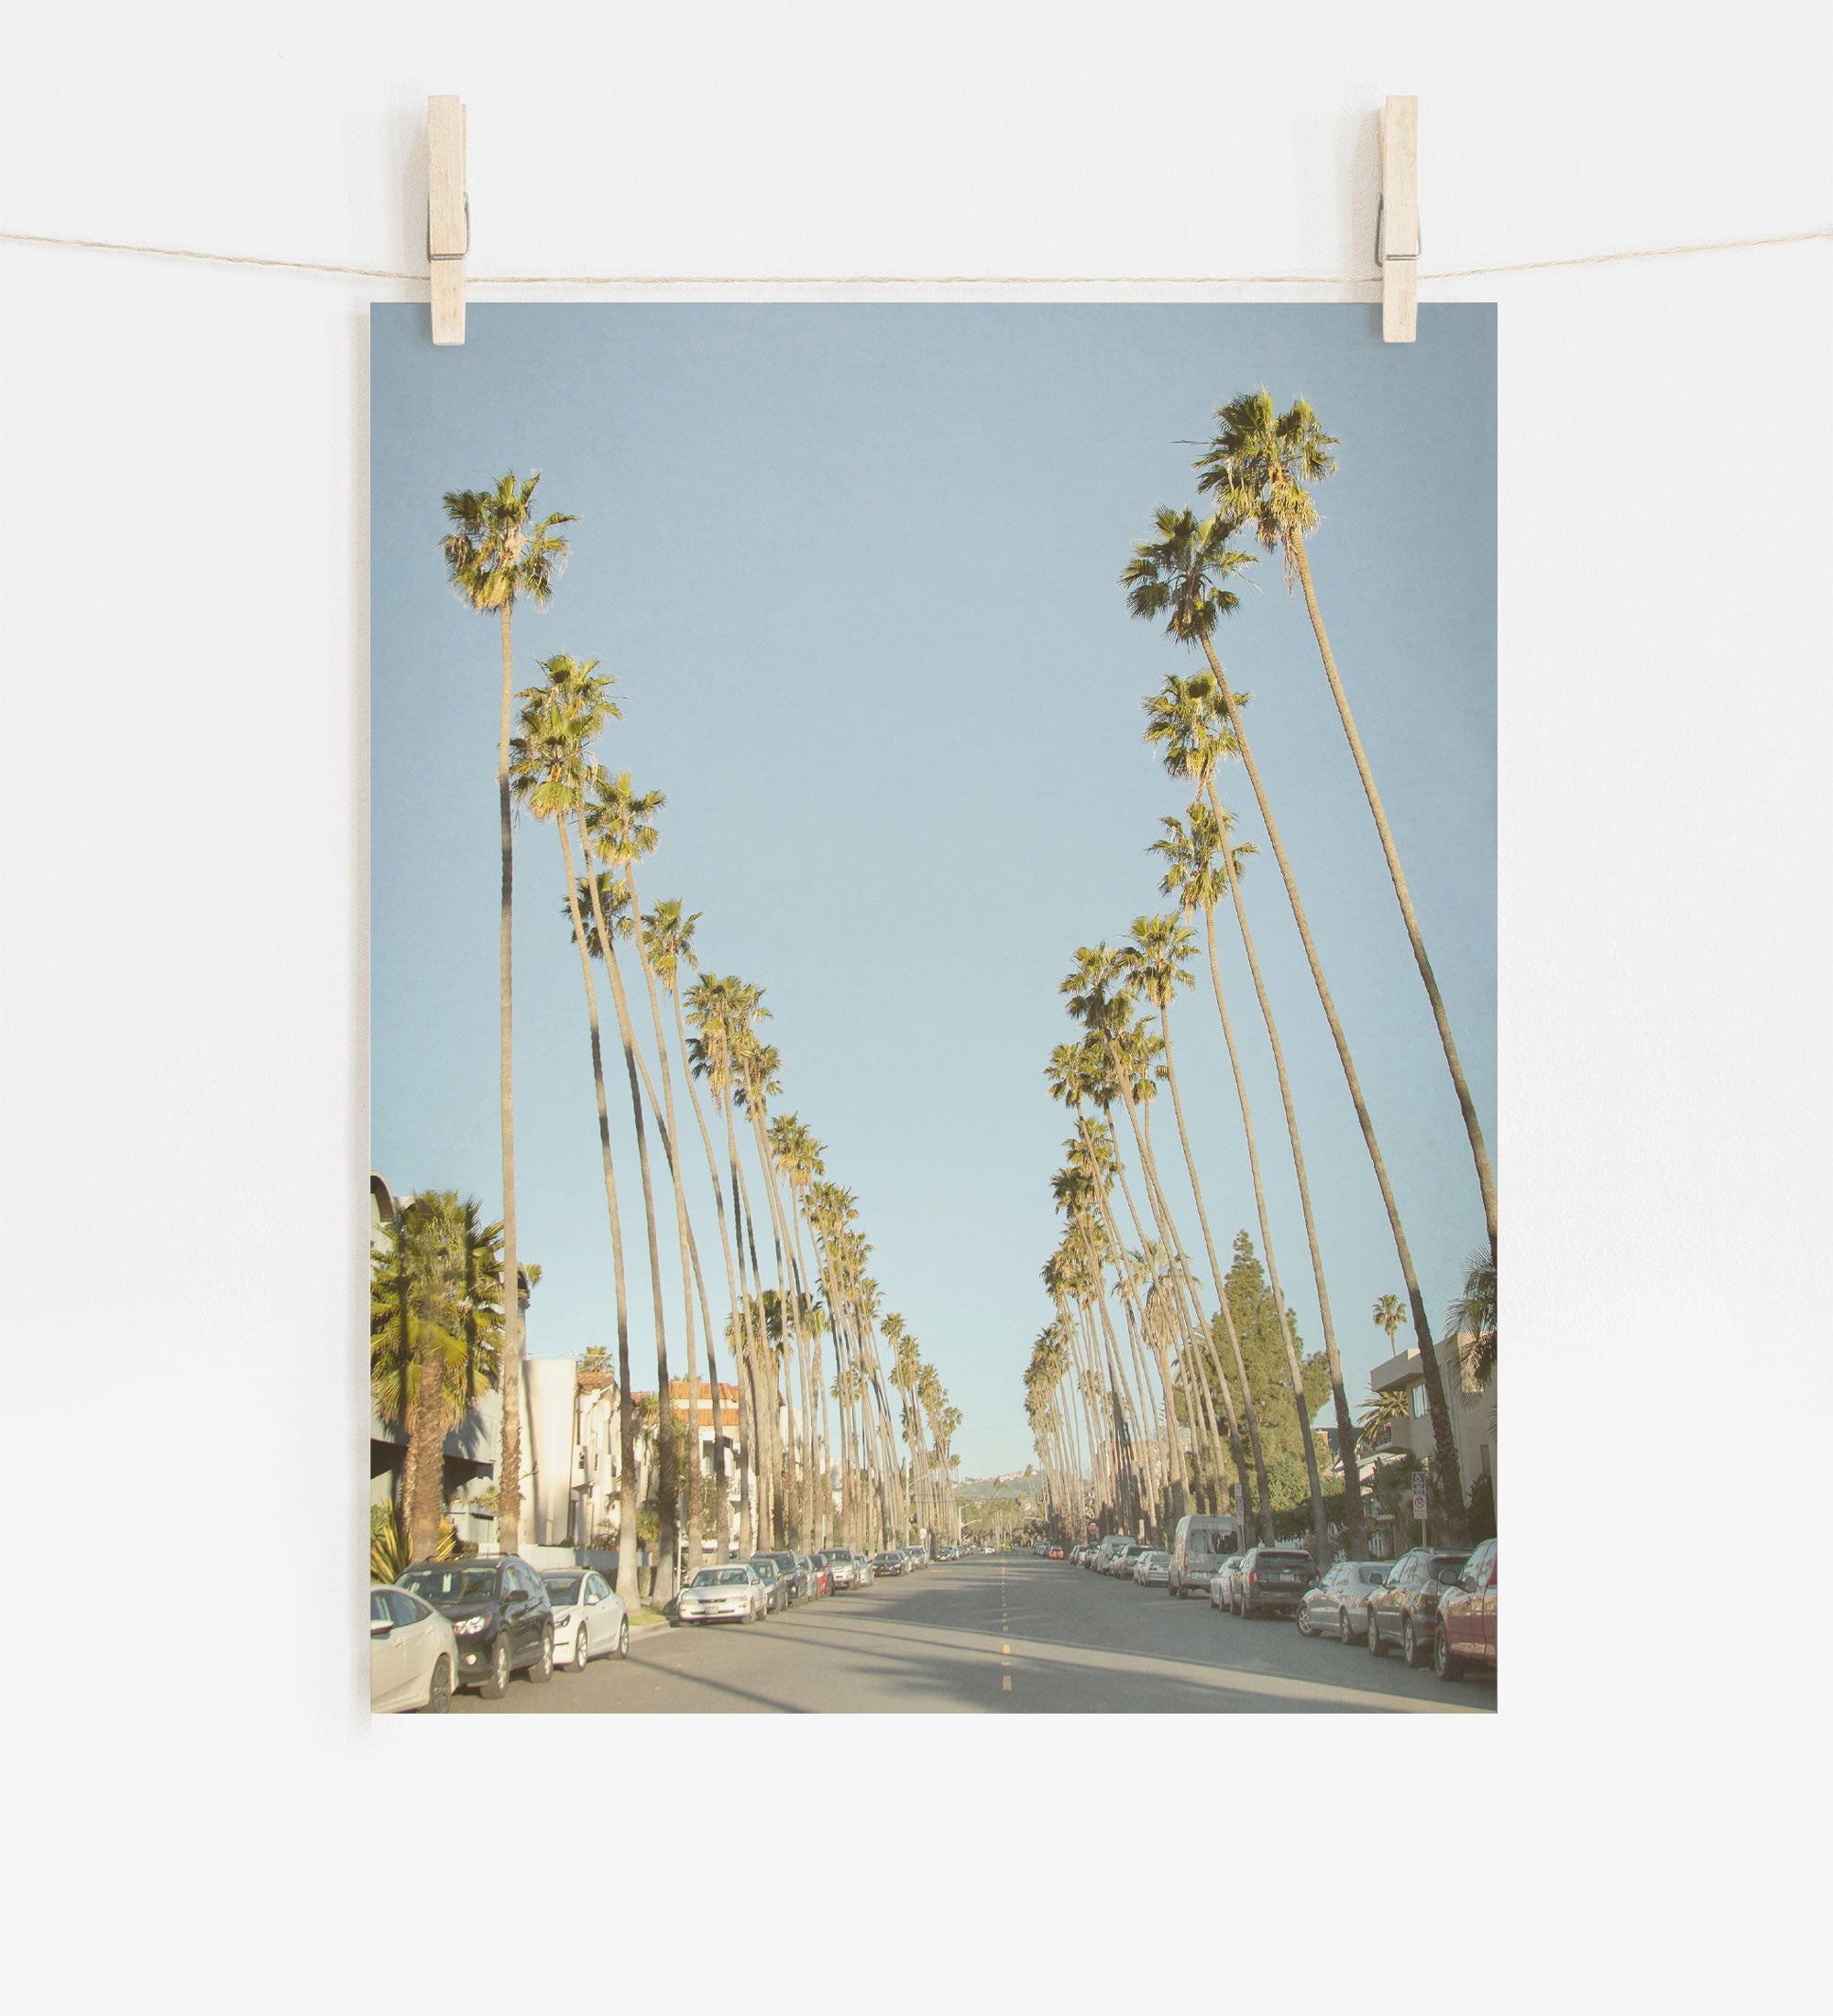 A photograph of a street lined with tall palm trees on Sunset Boulevard under a clear blue sky, pinned up by two clothespins on a wire, against a white background featuring the Los Angeles Palm Tree Lined Street 'Sunset Boulevard Dreams' by Offley Green.